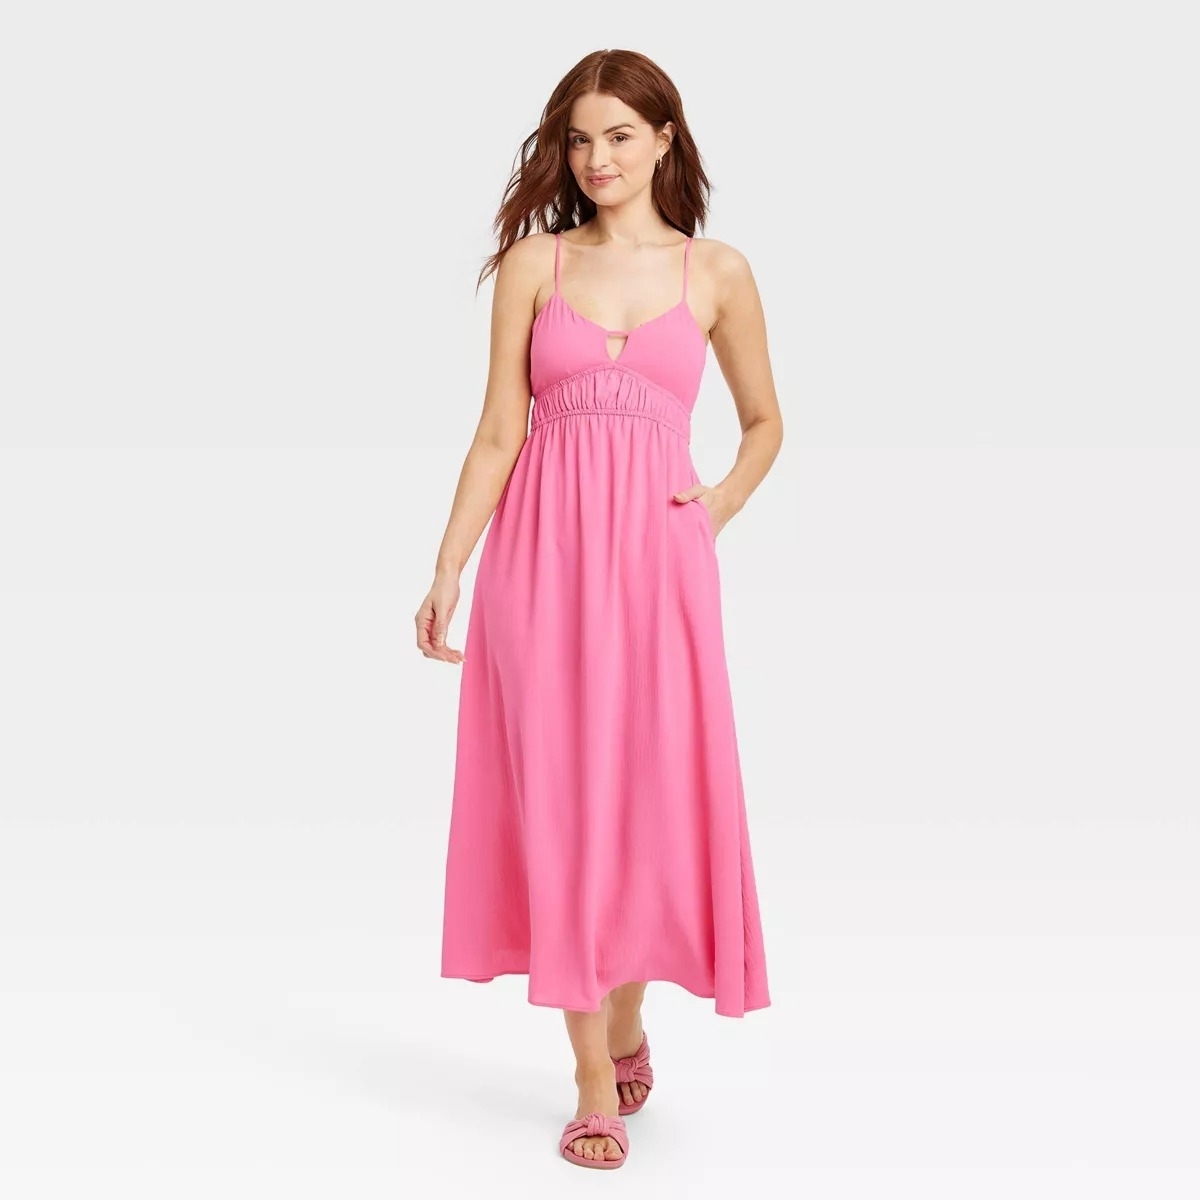 long pink dress with spaghetti straps on model